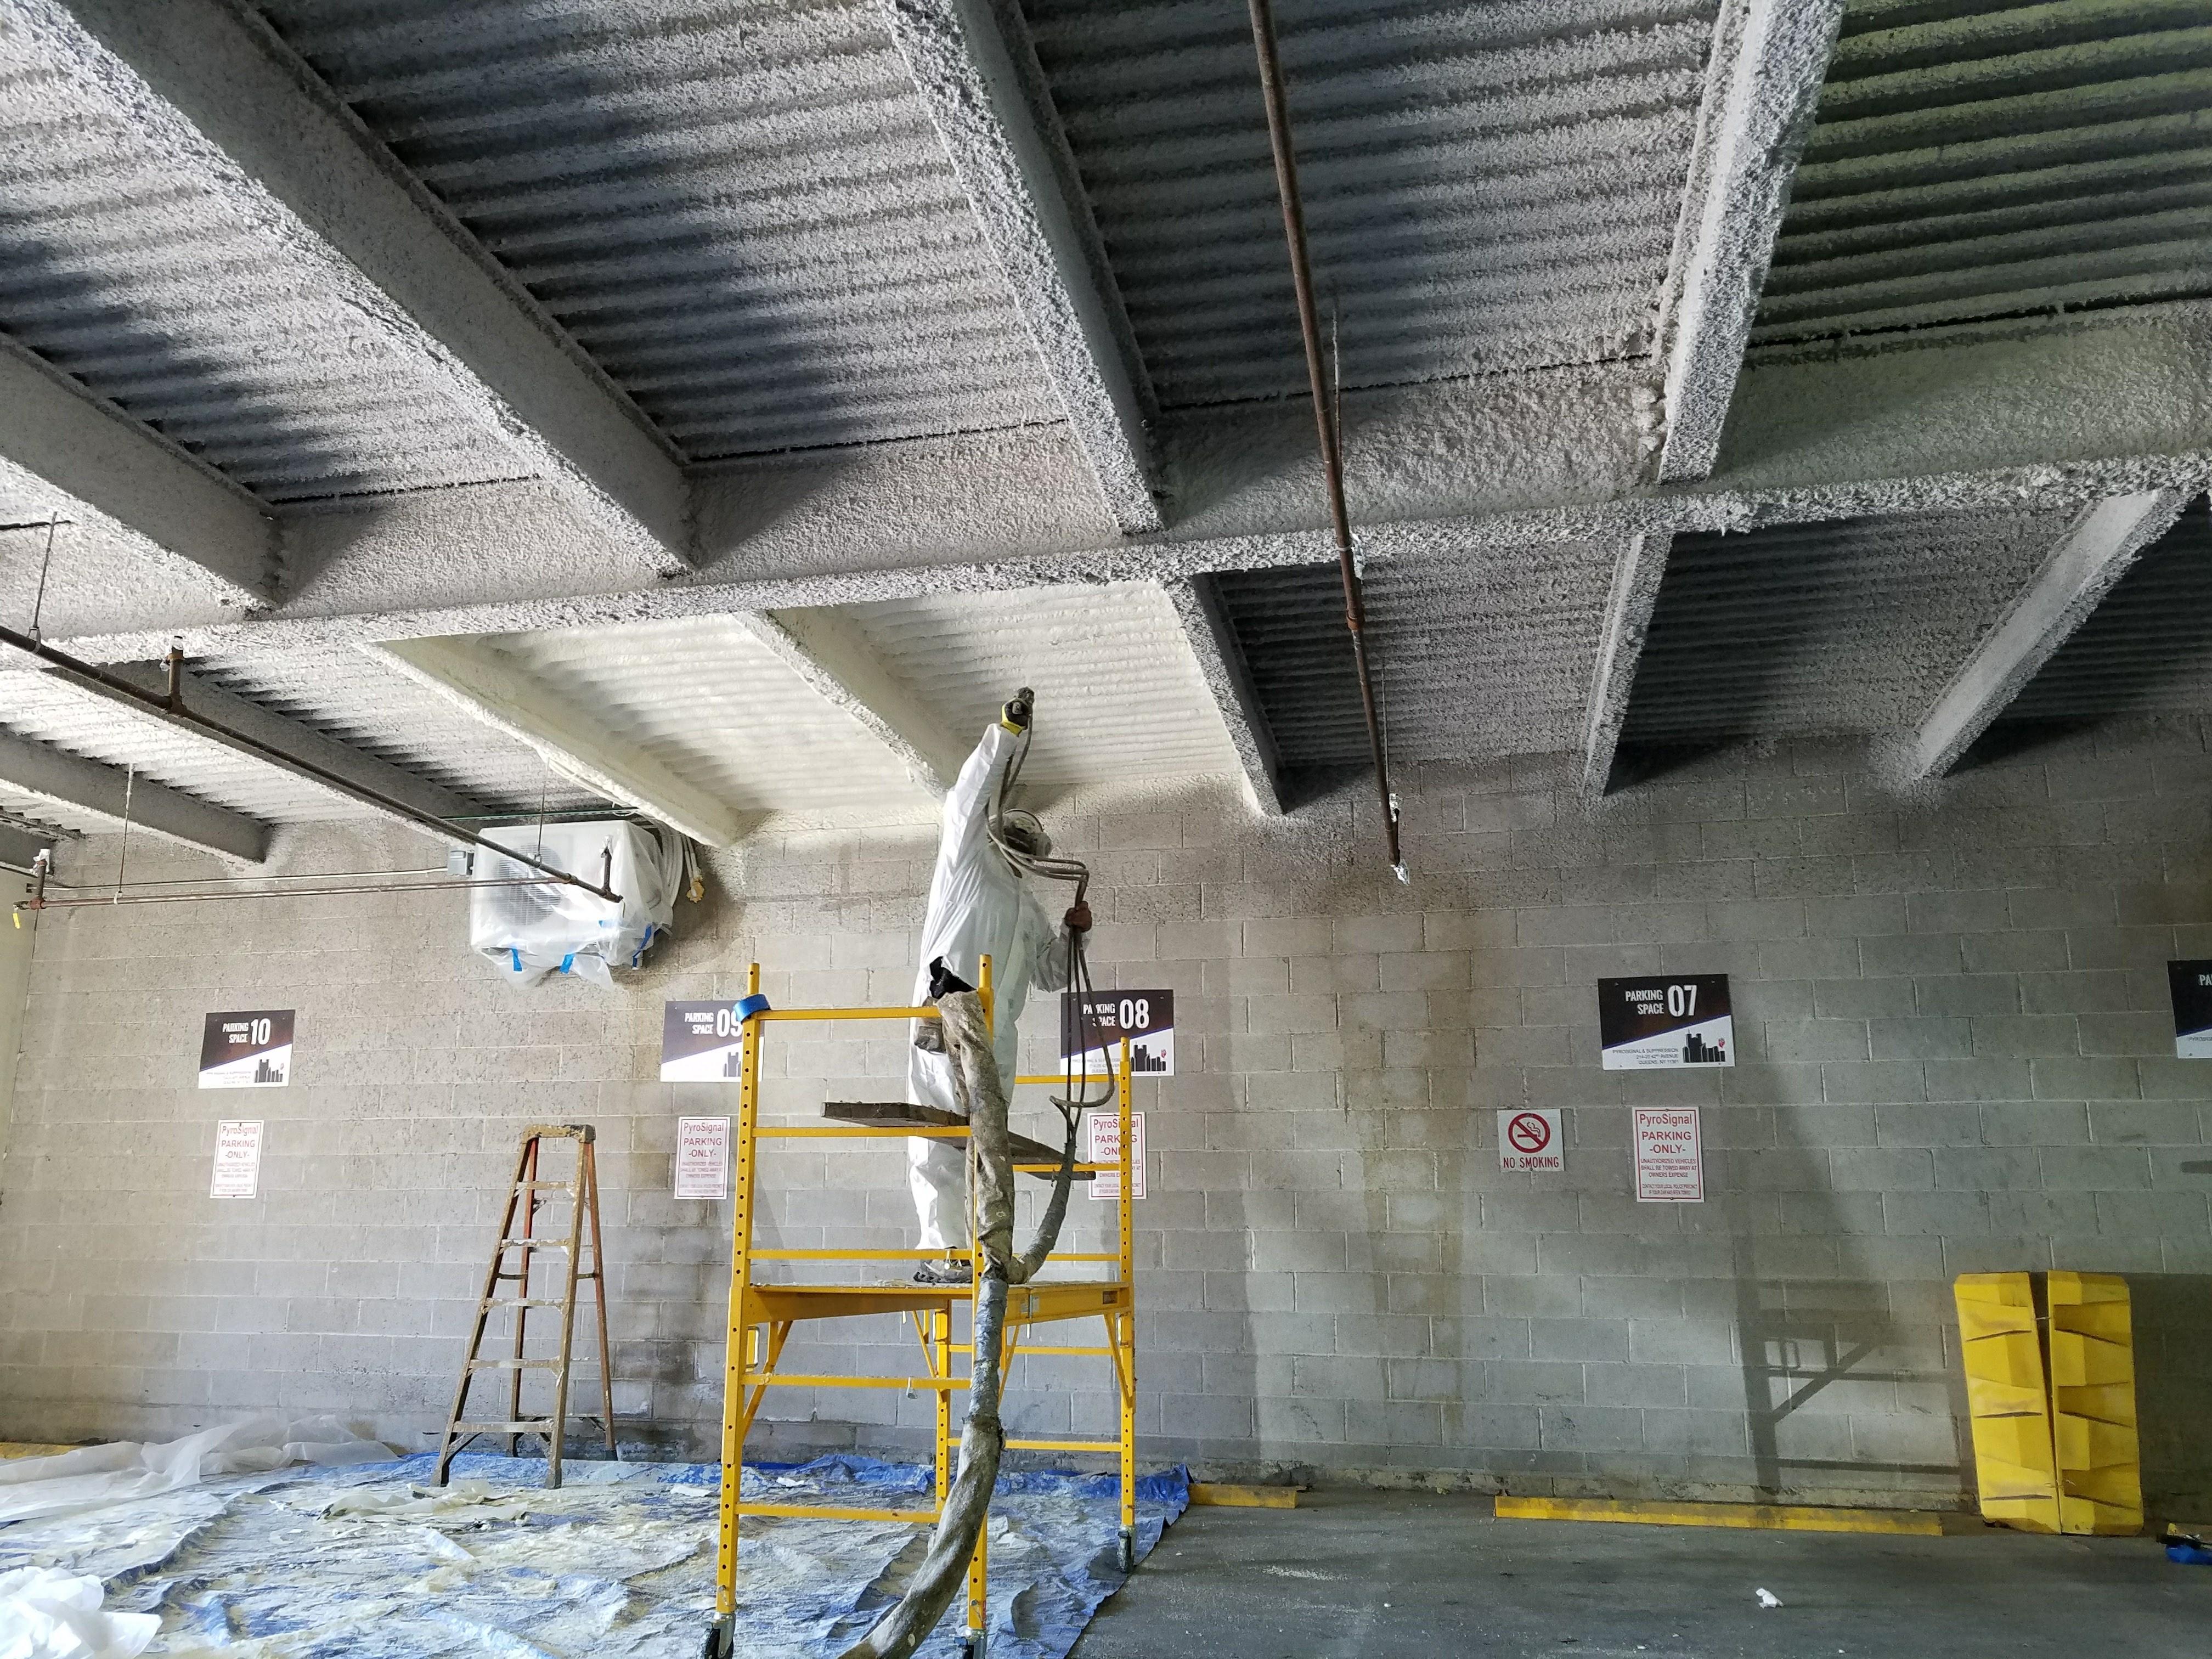 Condo Parking Garage Ceiling: 42nd Ave, Bayside, NY 11361